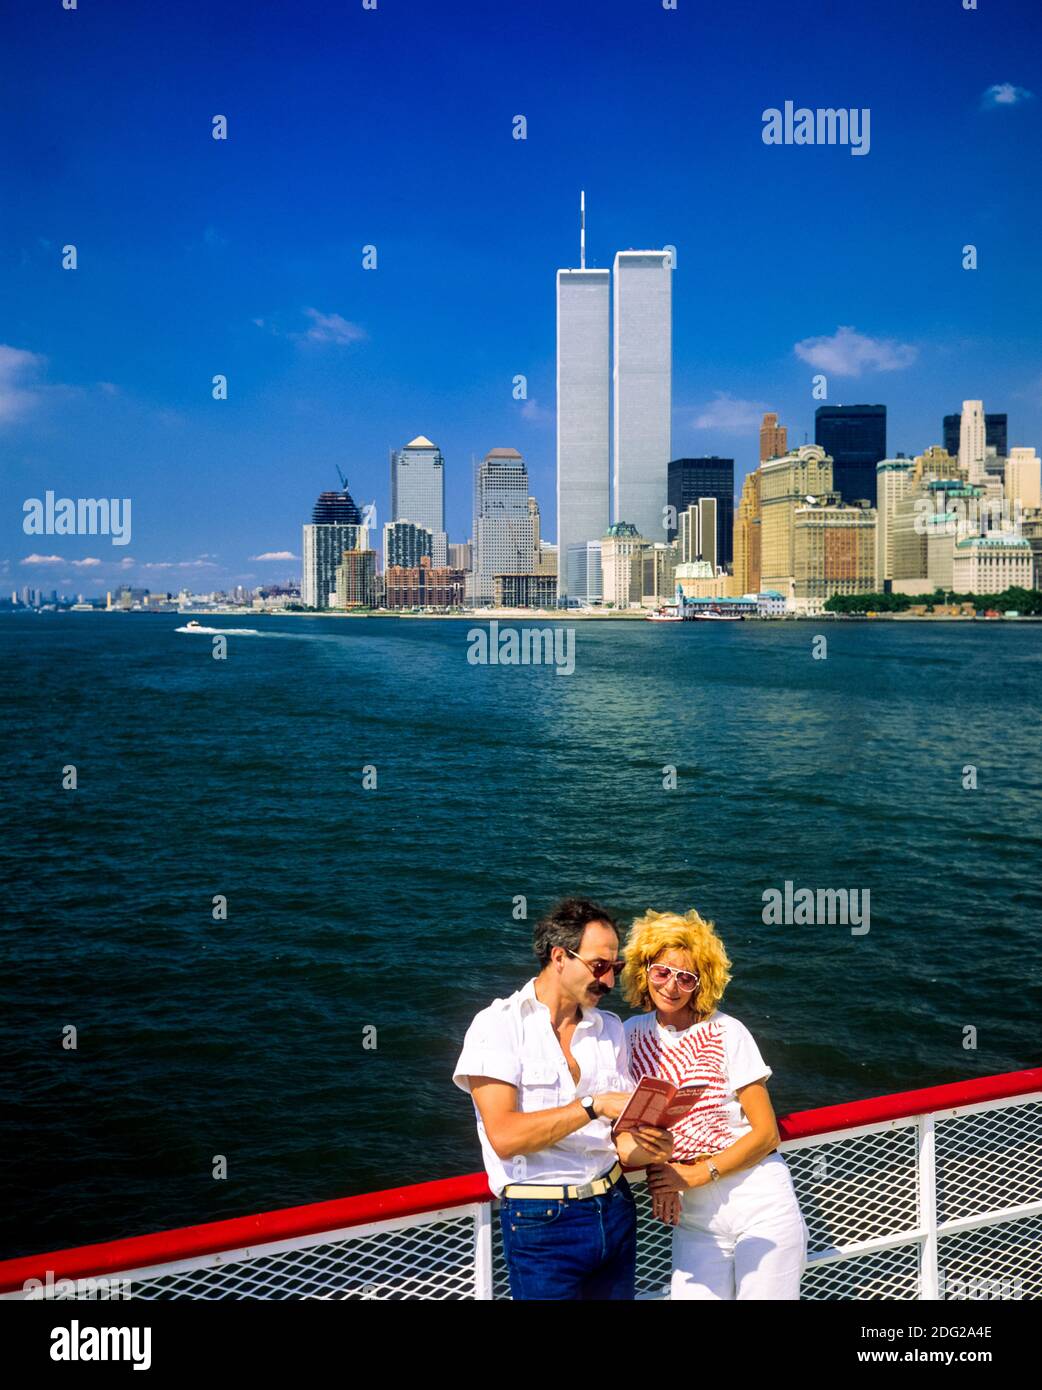 New York 1985, tourists couple, sightseeing boat river cruise, WTC World Trade Center twin towers, Manhattan skyline, New York City, NY, NYC, USA, Stock Photo